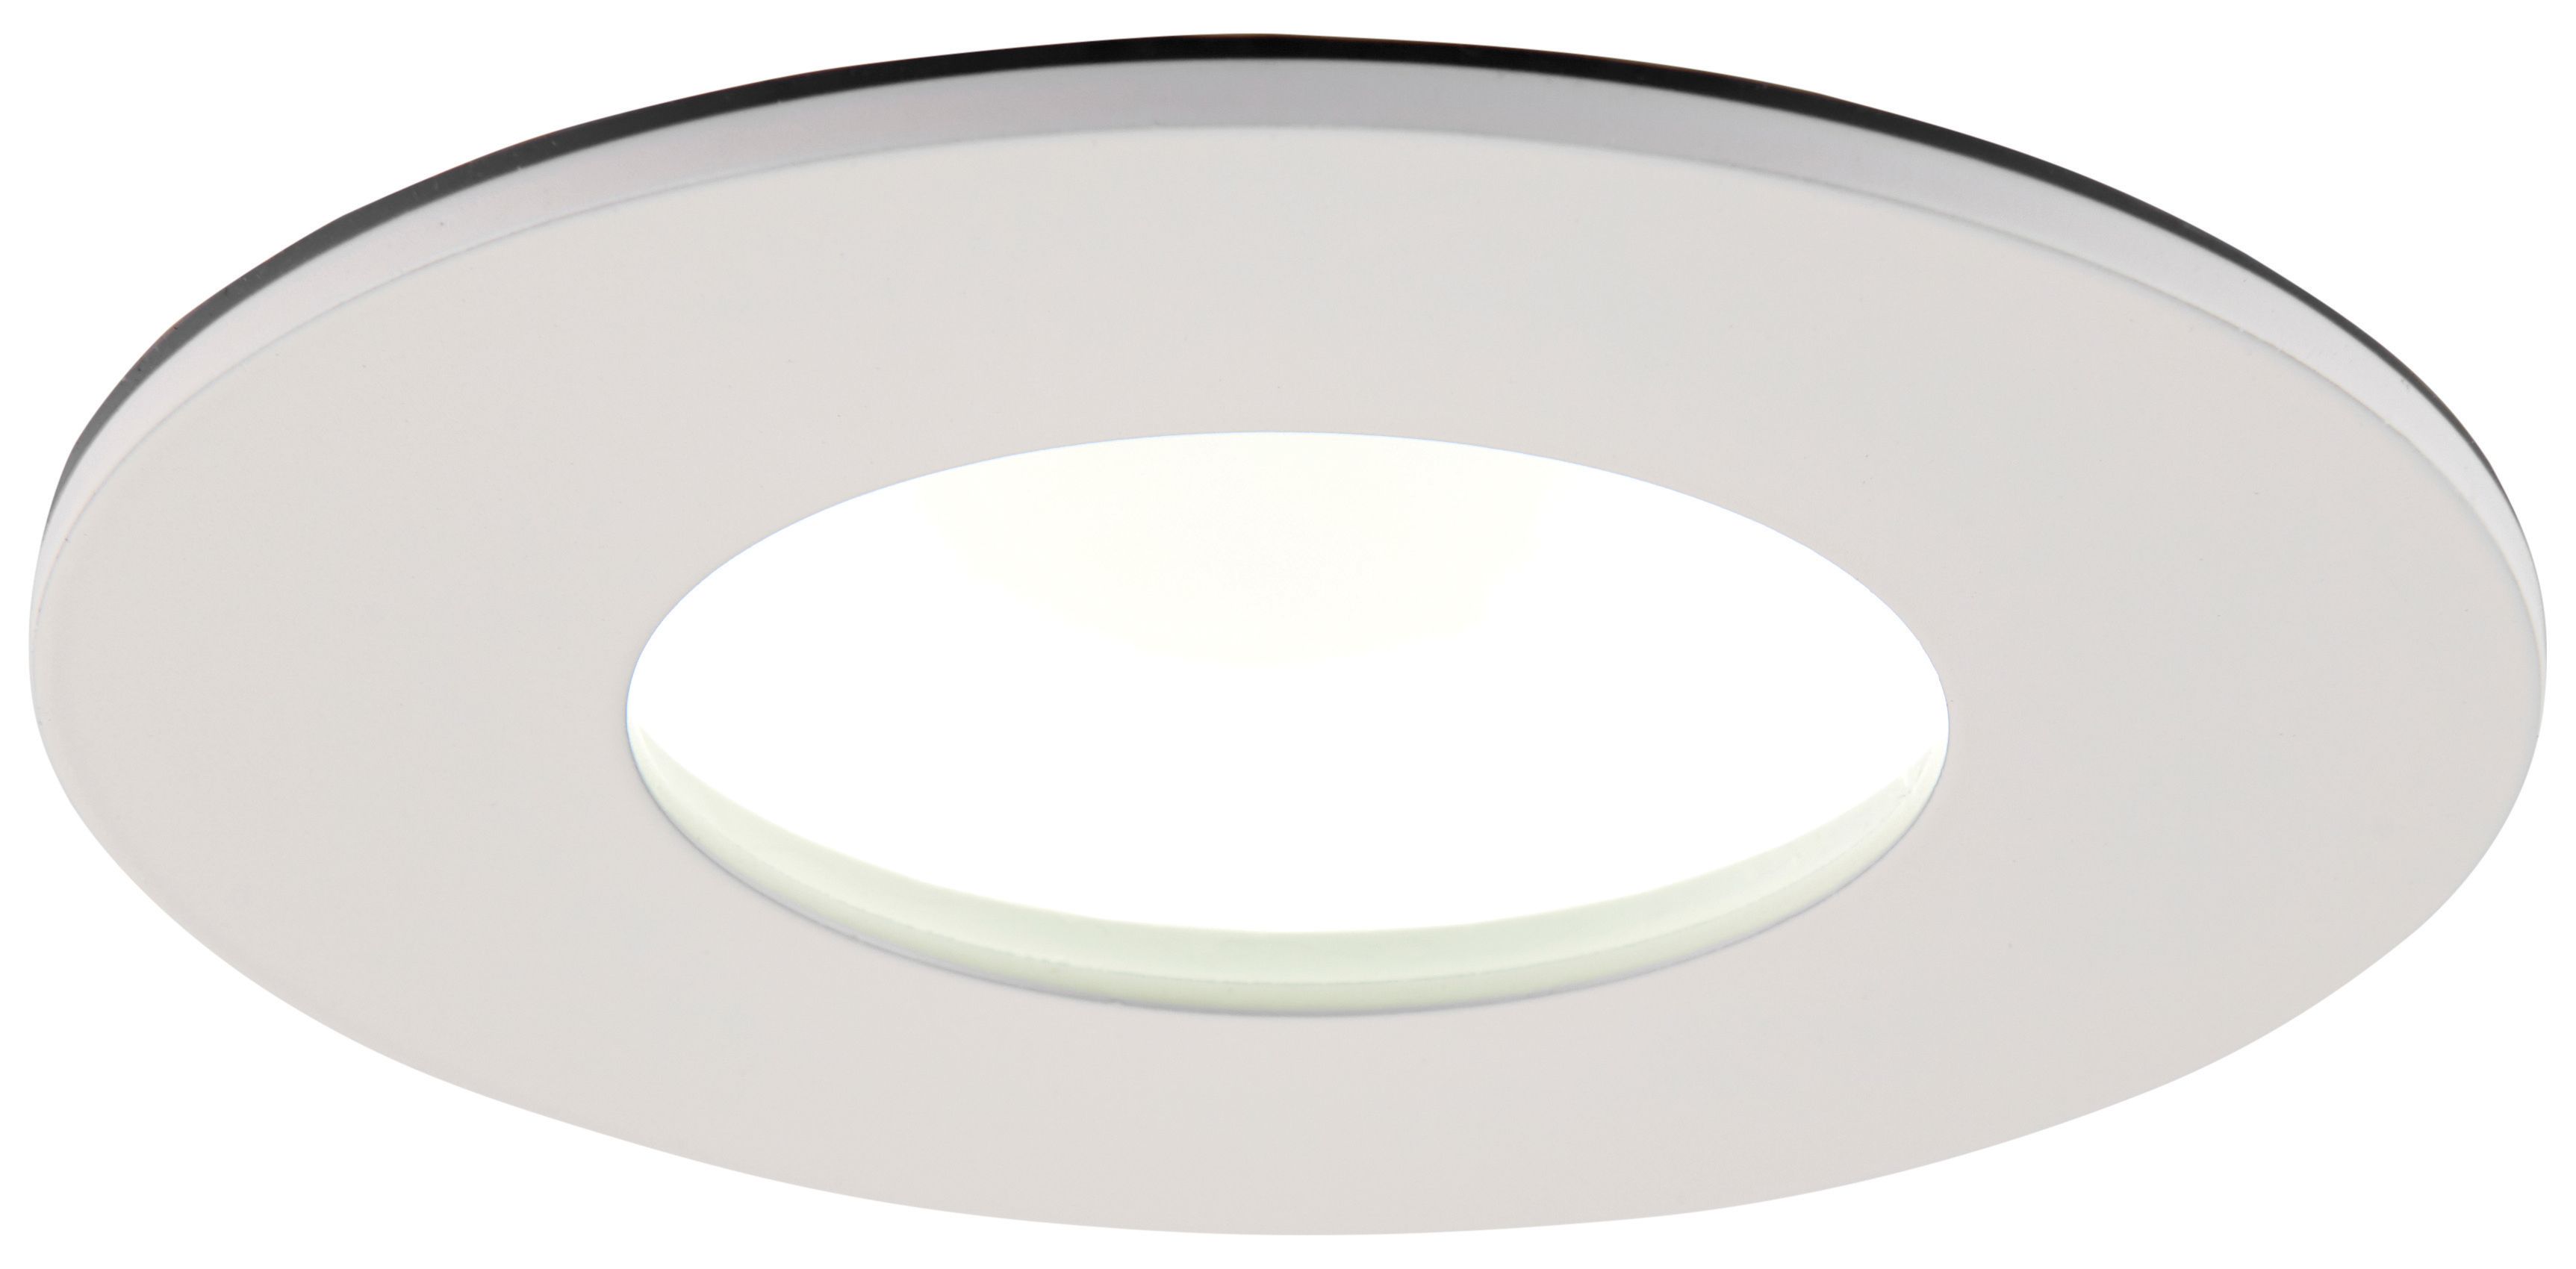 Saxby Orbital Plus LED Anti Glare Fire Rated IP65 Cool White Dimmable Downlight 9W - Matt White